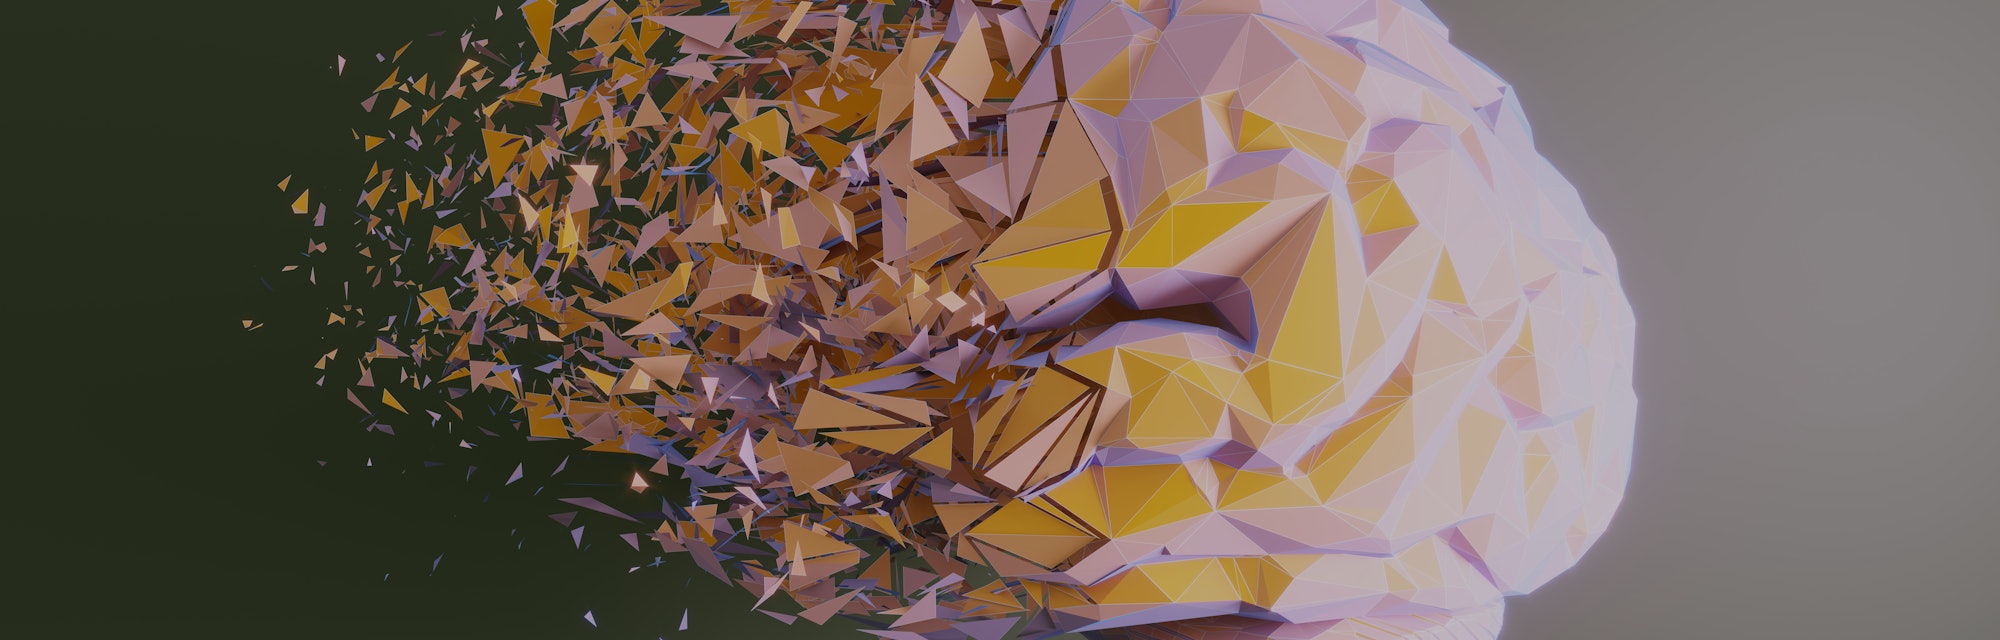 Low poly human brain dissolving, symbolizing mental disorder, Alzheimer's disease and mental health ...